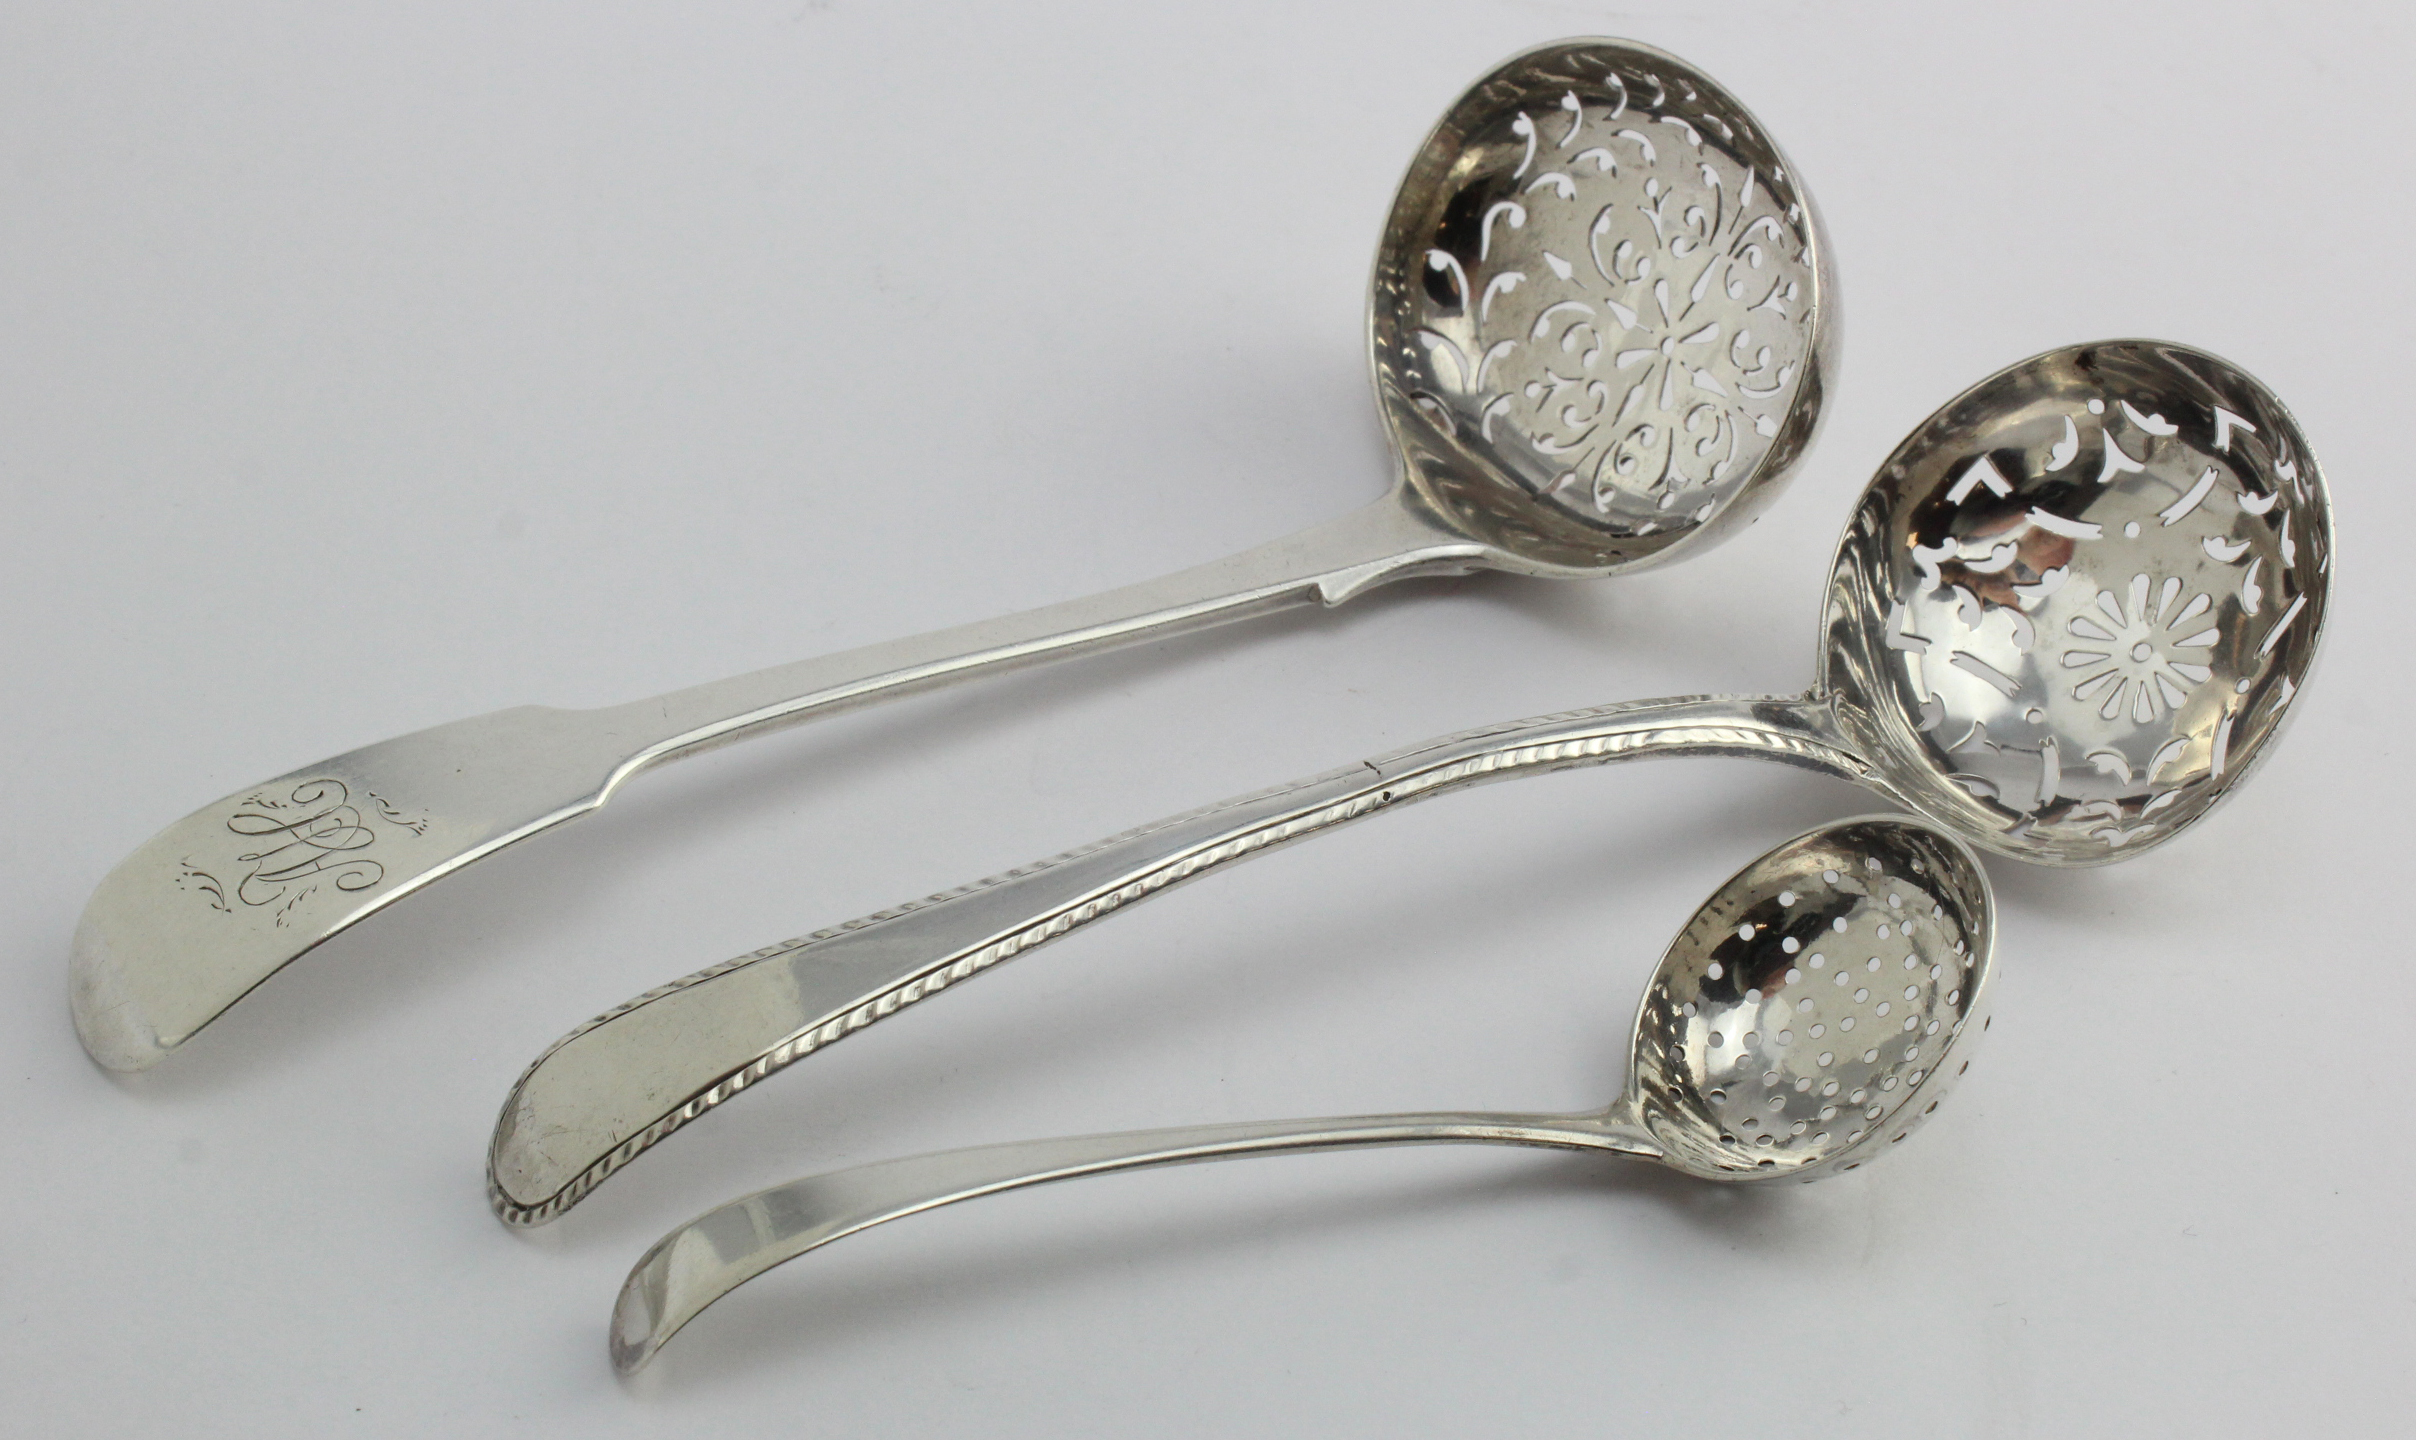 Two George III silver sugar sifters c1780/1790 plus one Victorian silver fiddle pattern sugar